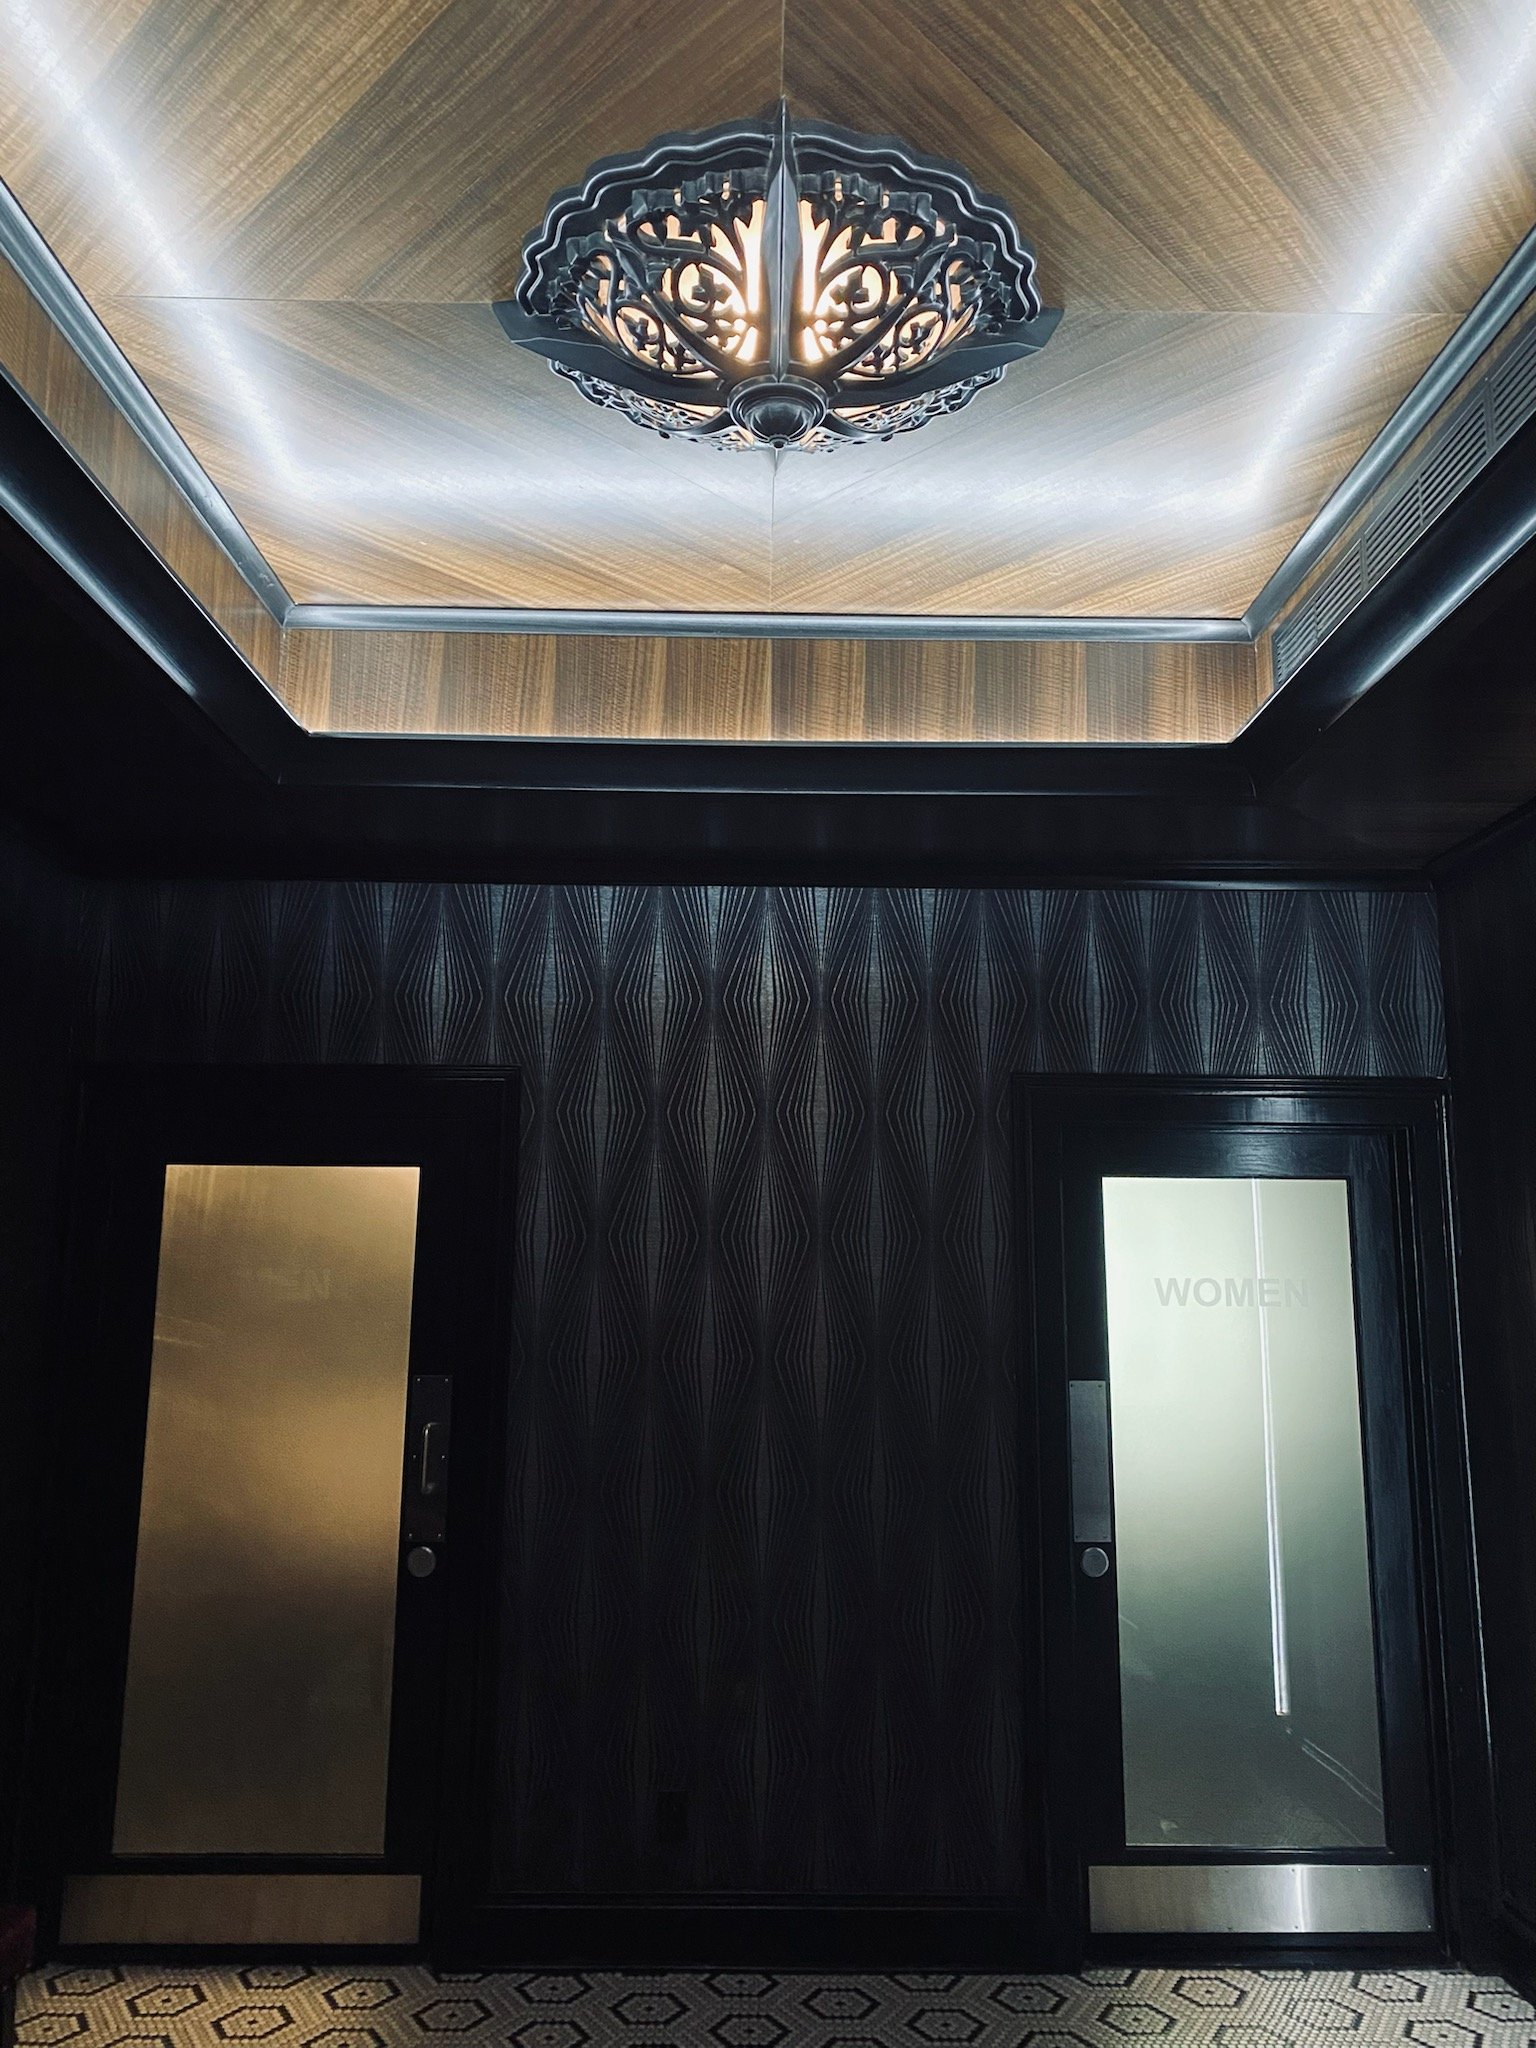  chandelier, ceiling, and wall paneling designed and built by Tempo Designs Gabriel McKeagney 